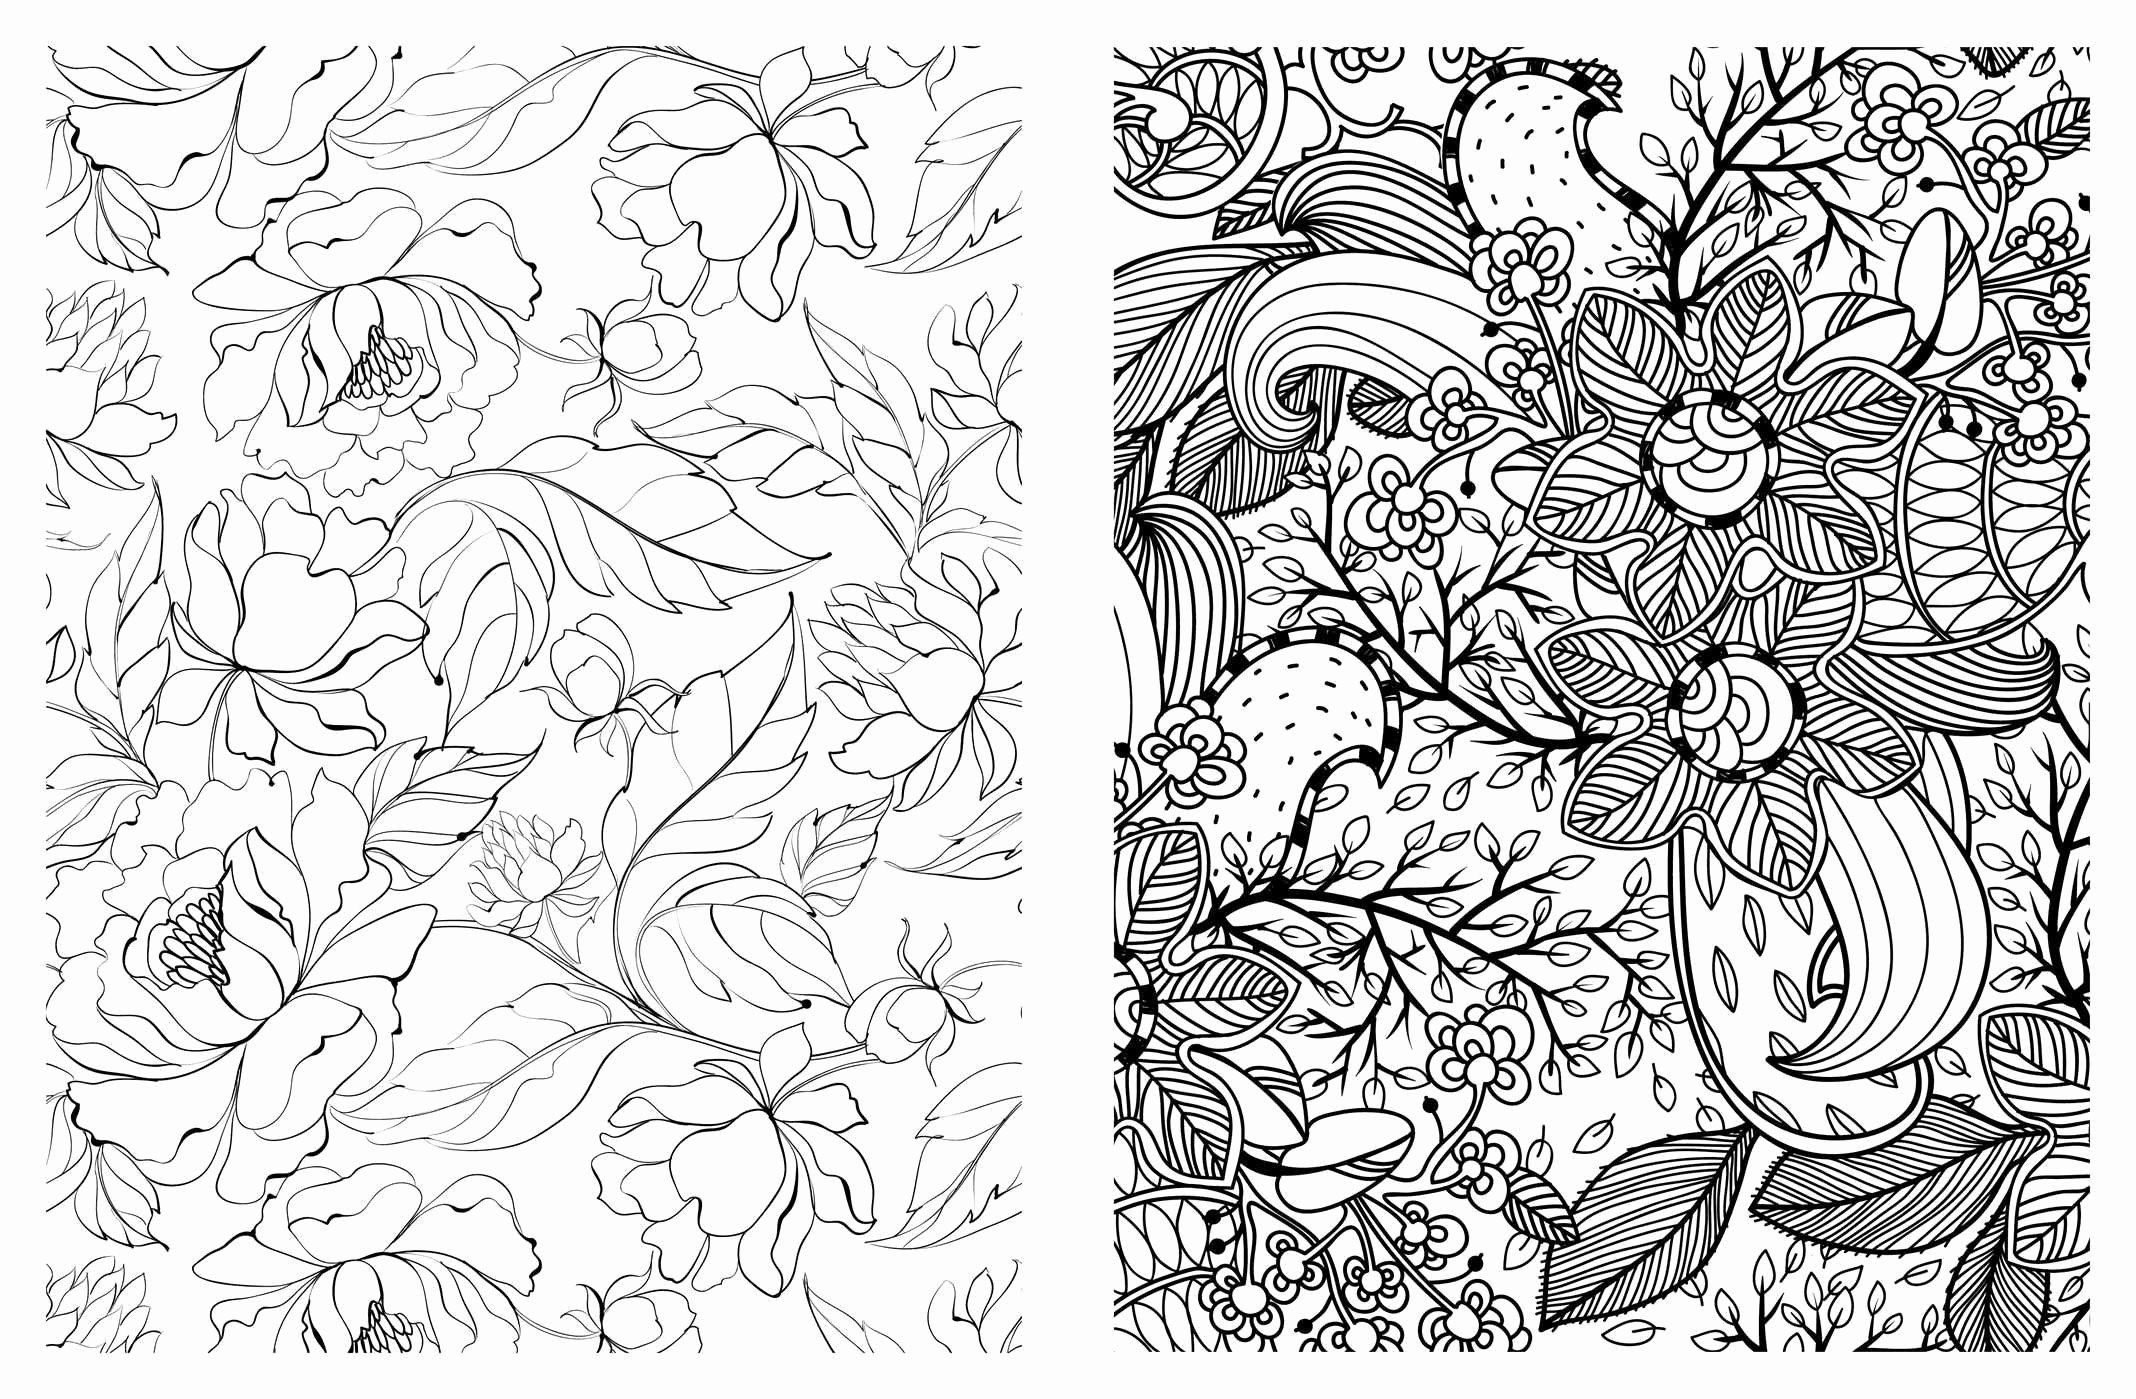 15 Famous Flowers In Vase 2024 free download flowers in vase of printable coloring pages flower cool vases flower vase coloring page with printable coloring pages flower cool vases flower vase coloring page pages flowers in a top i